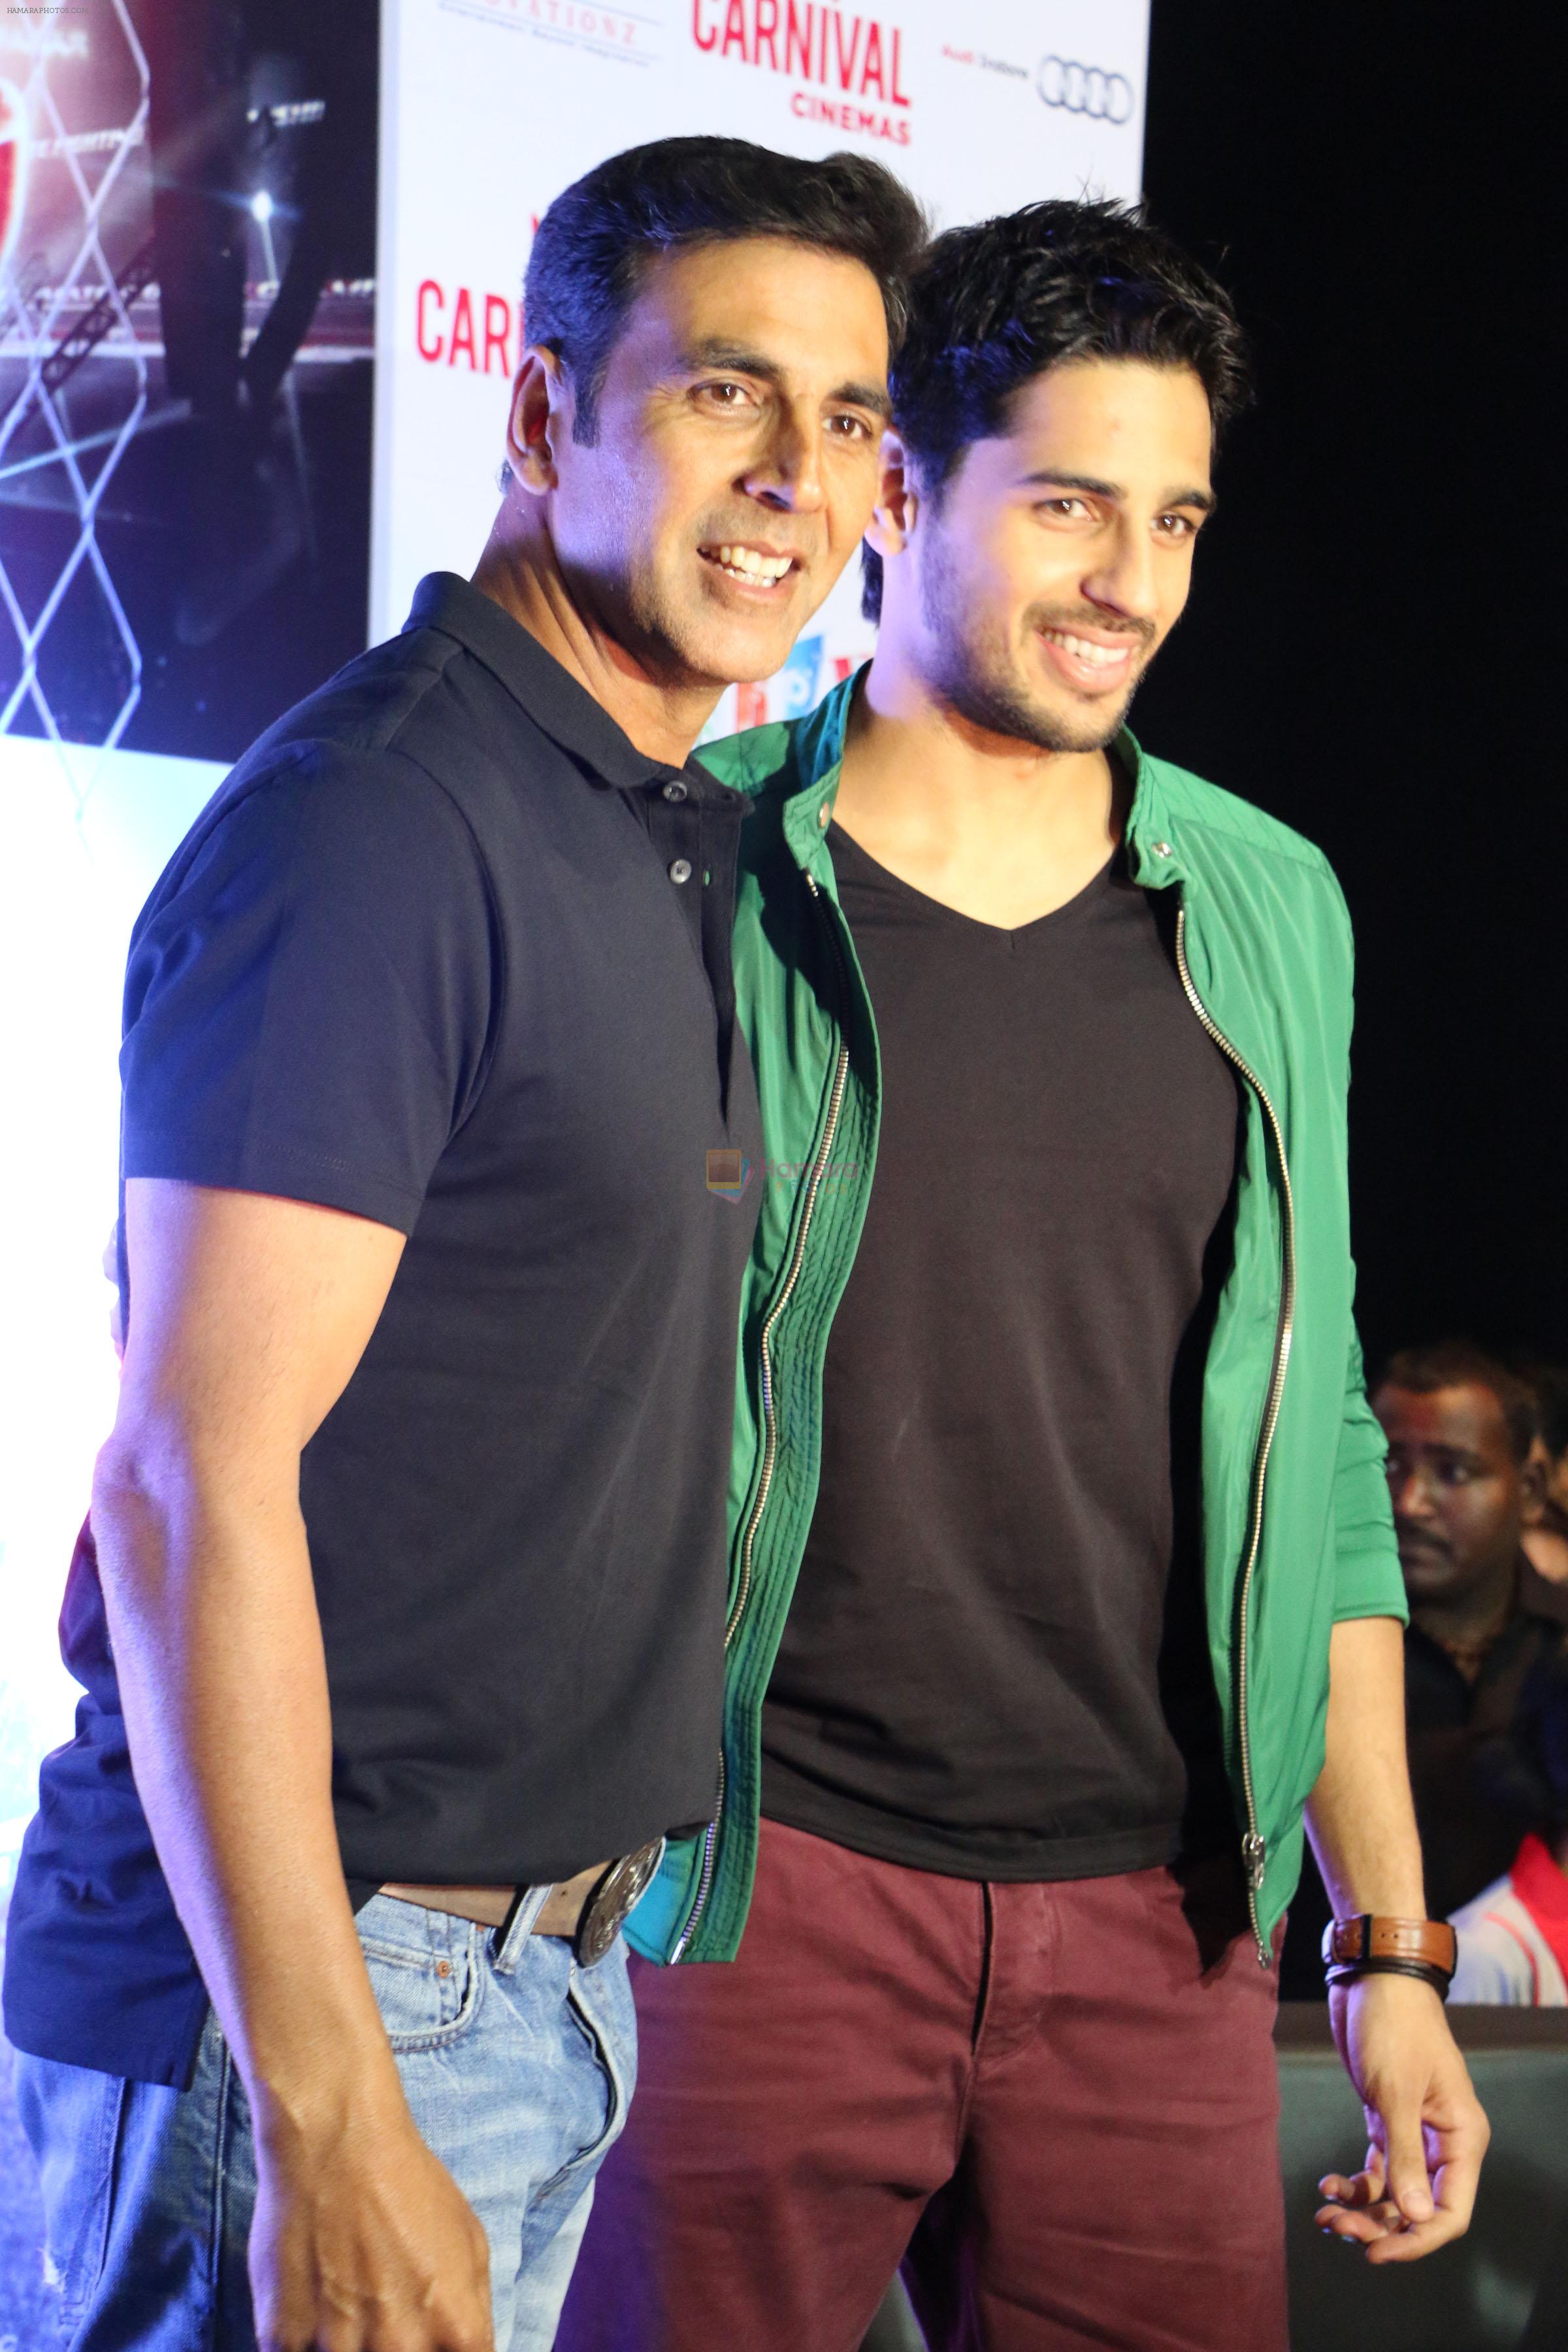 Carnival Cinemas hosted the press conference of film Brothers with Akshay Kumar and Siddharth Malhotra in Indore on 1st Aug